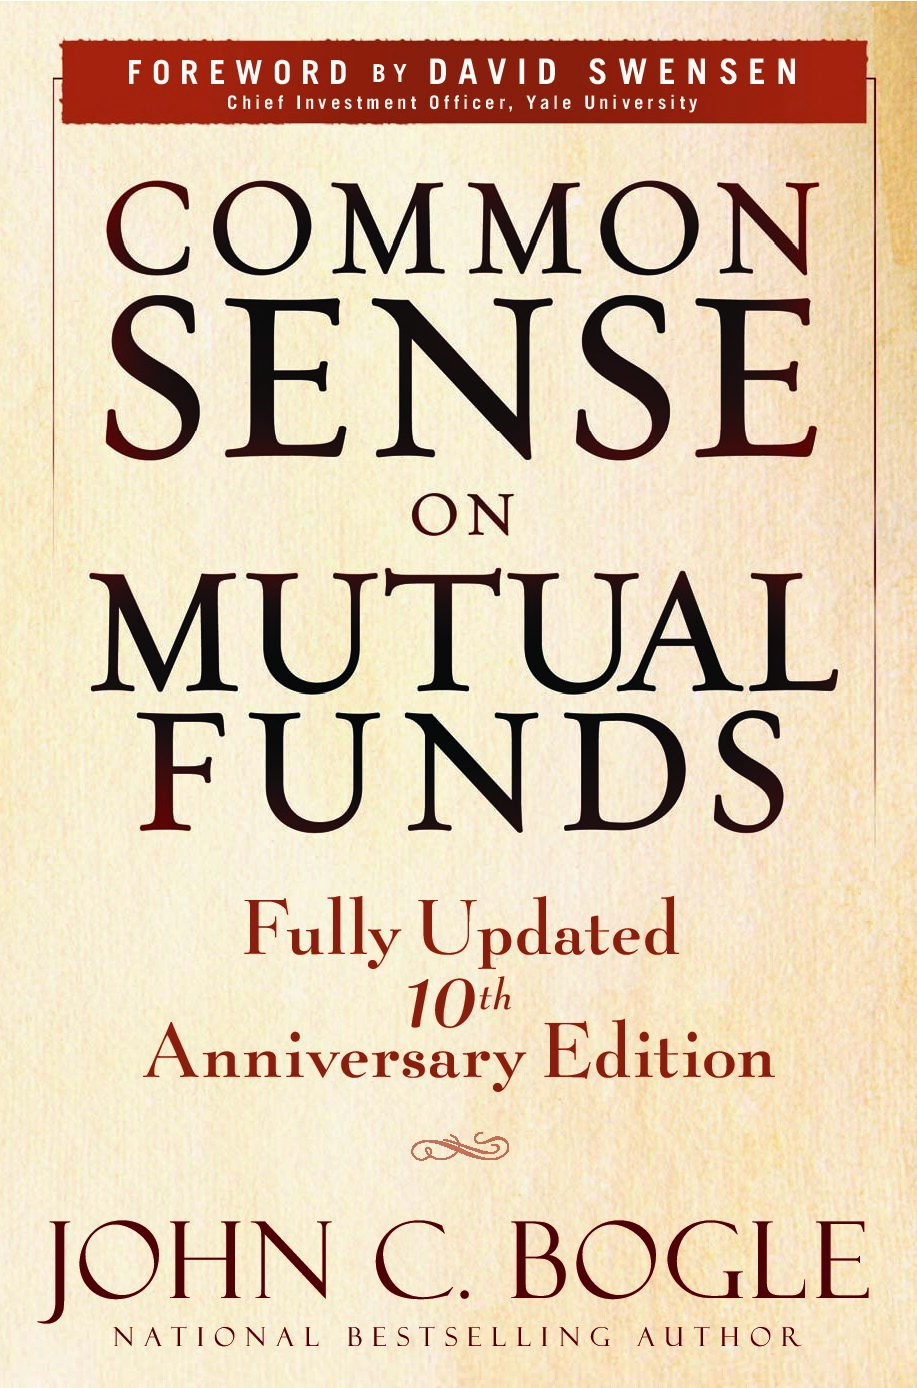 Common Sense on Mutual Funds, Fully Updated 10th Anniversary Edition